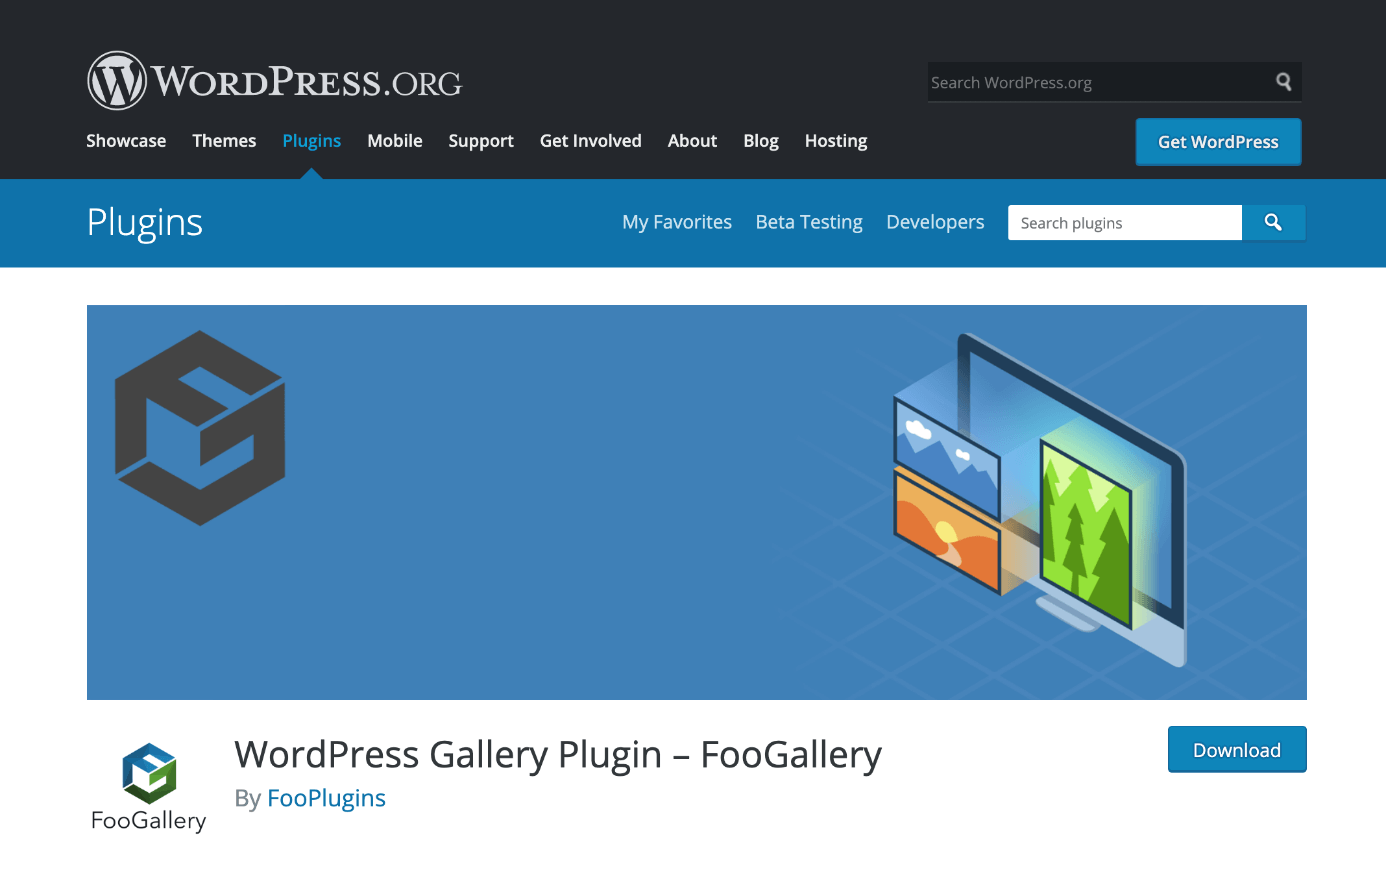 FooGallery offers a free lite version at wordpress.org